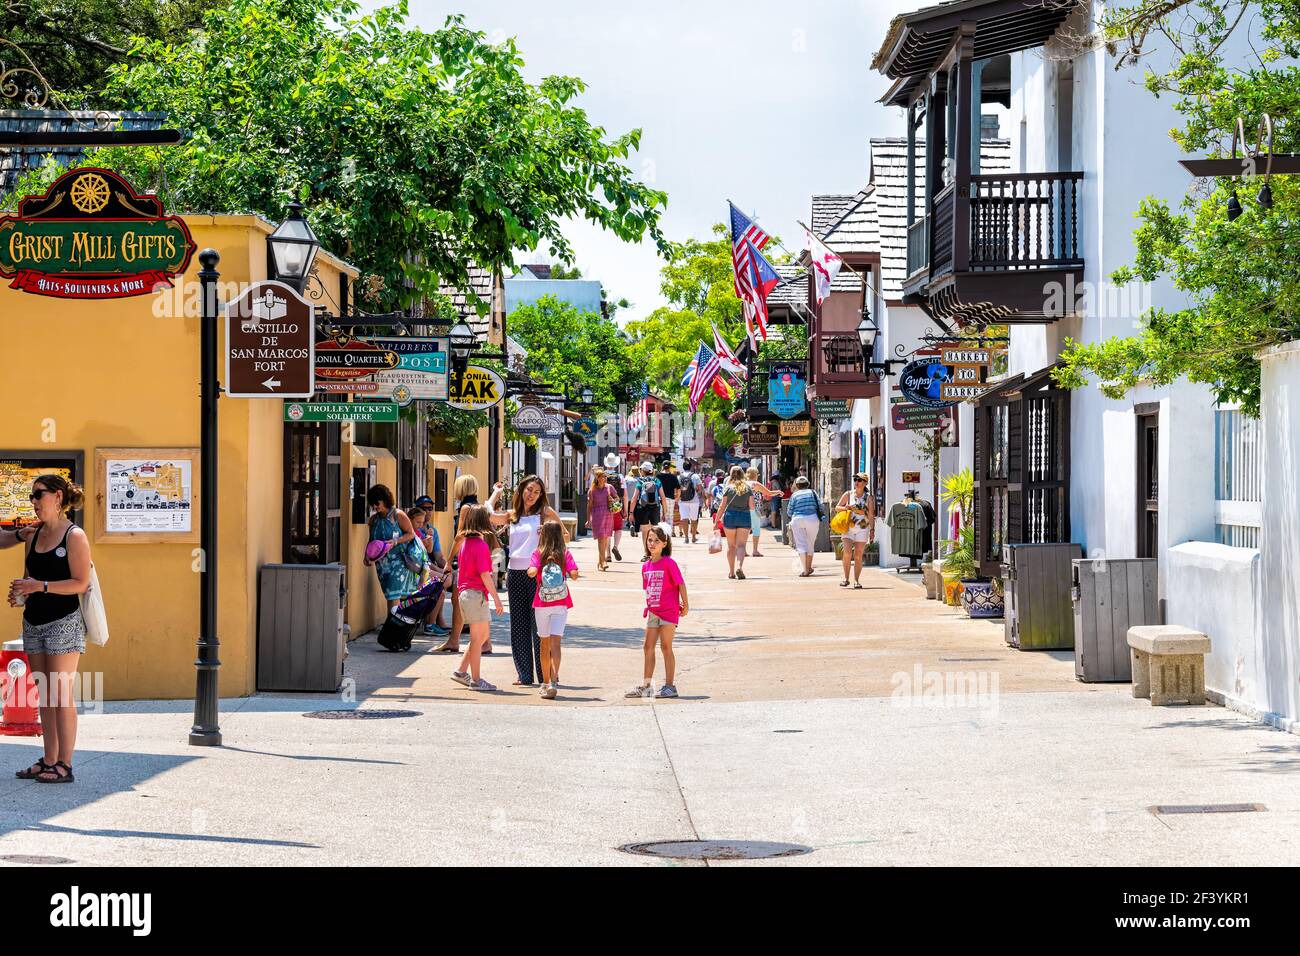 St. Augustine, USA - May 10, 2018: People walking and shopping at Florida city St George Street on summer day by stores shops and restaurants in old t Stock Photo